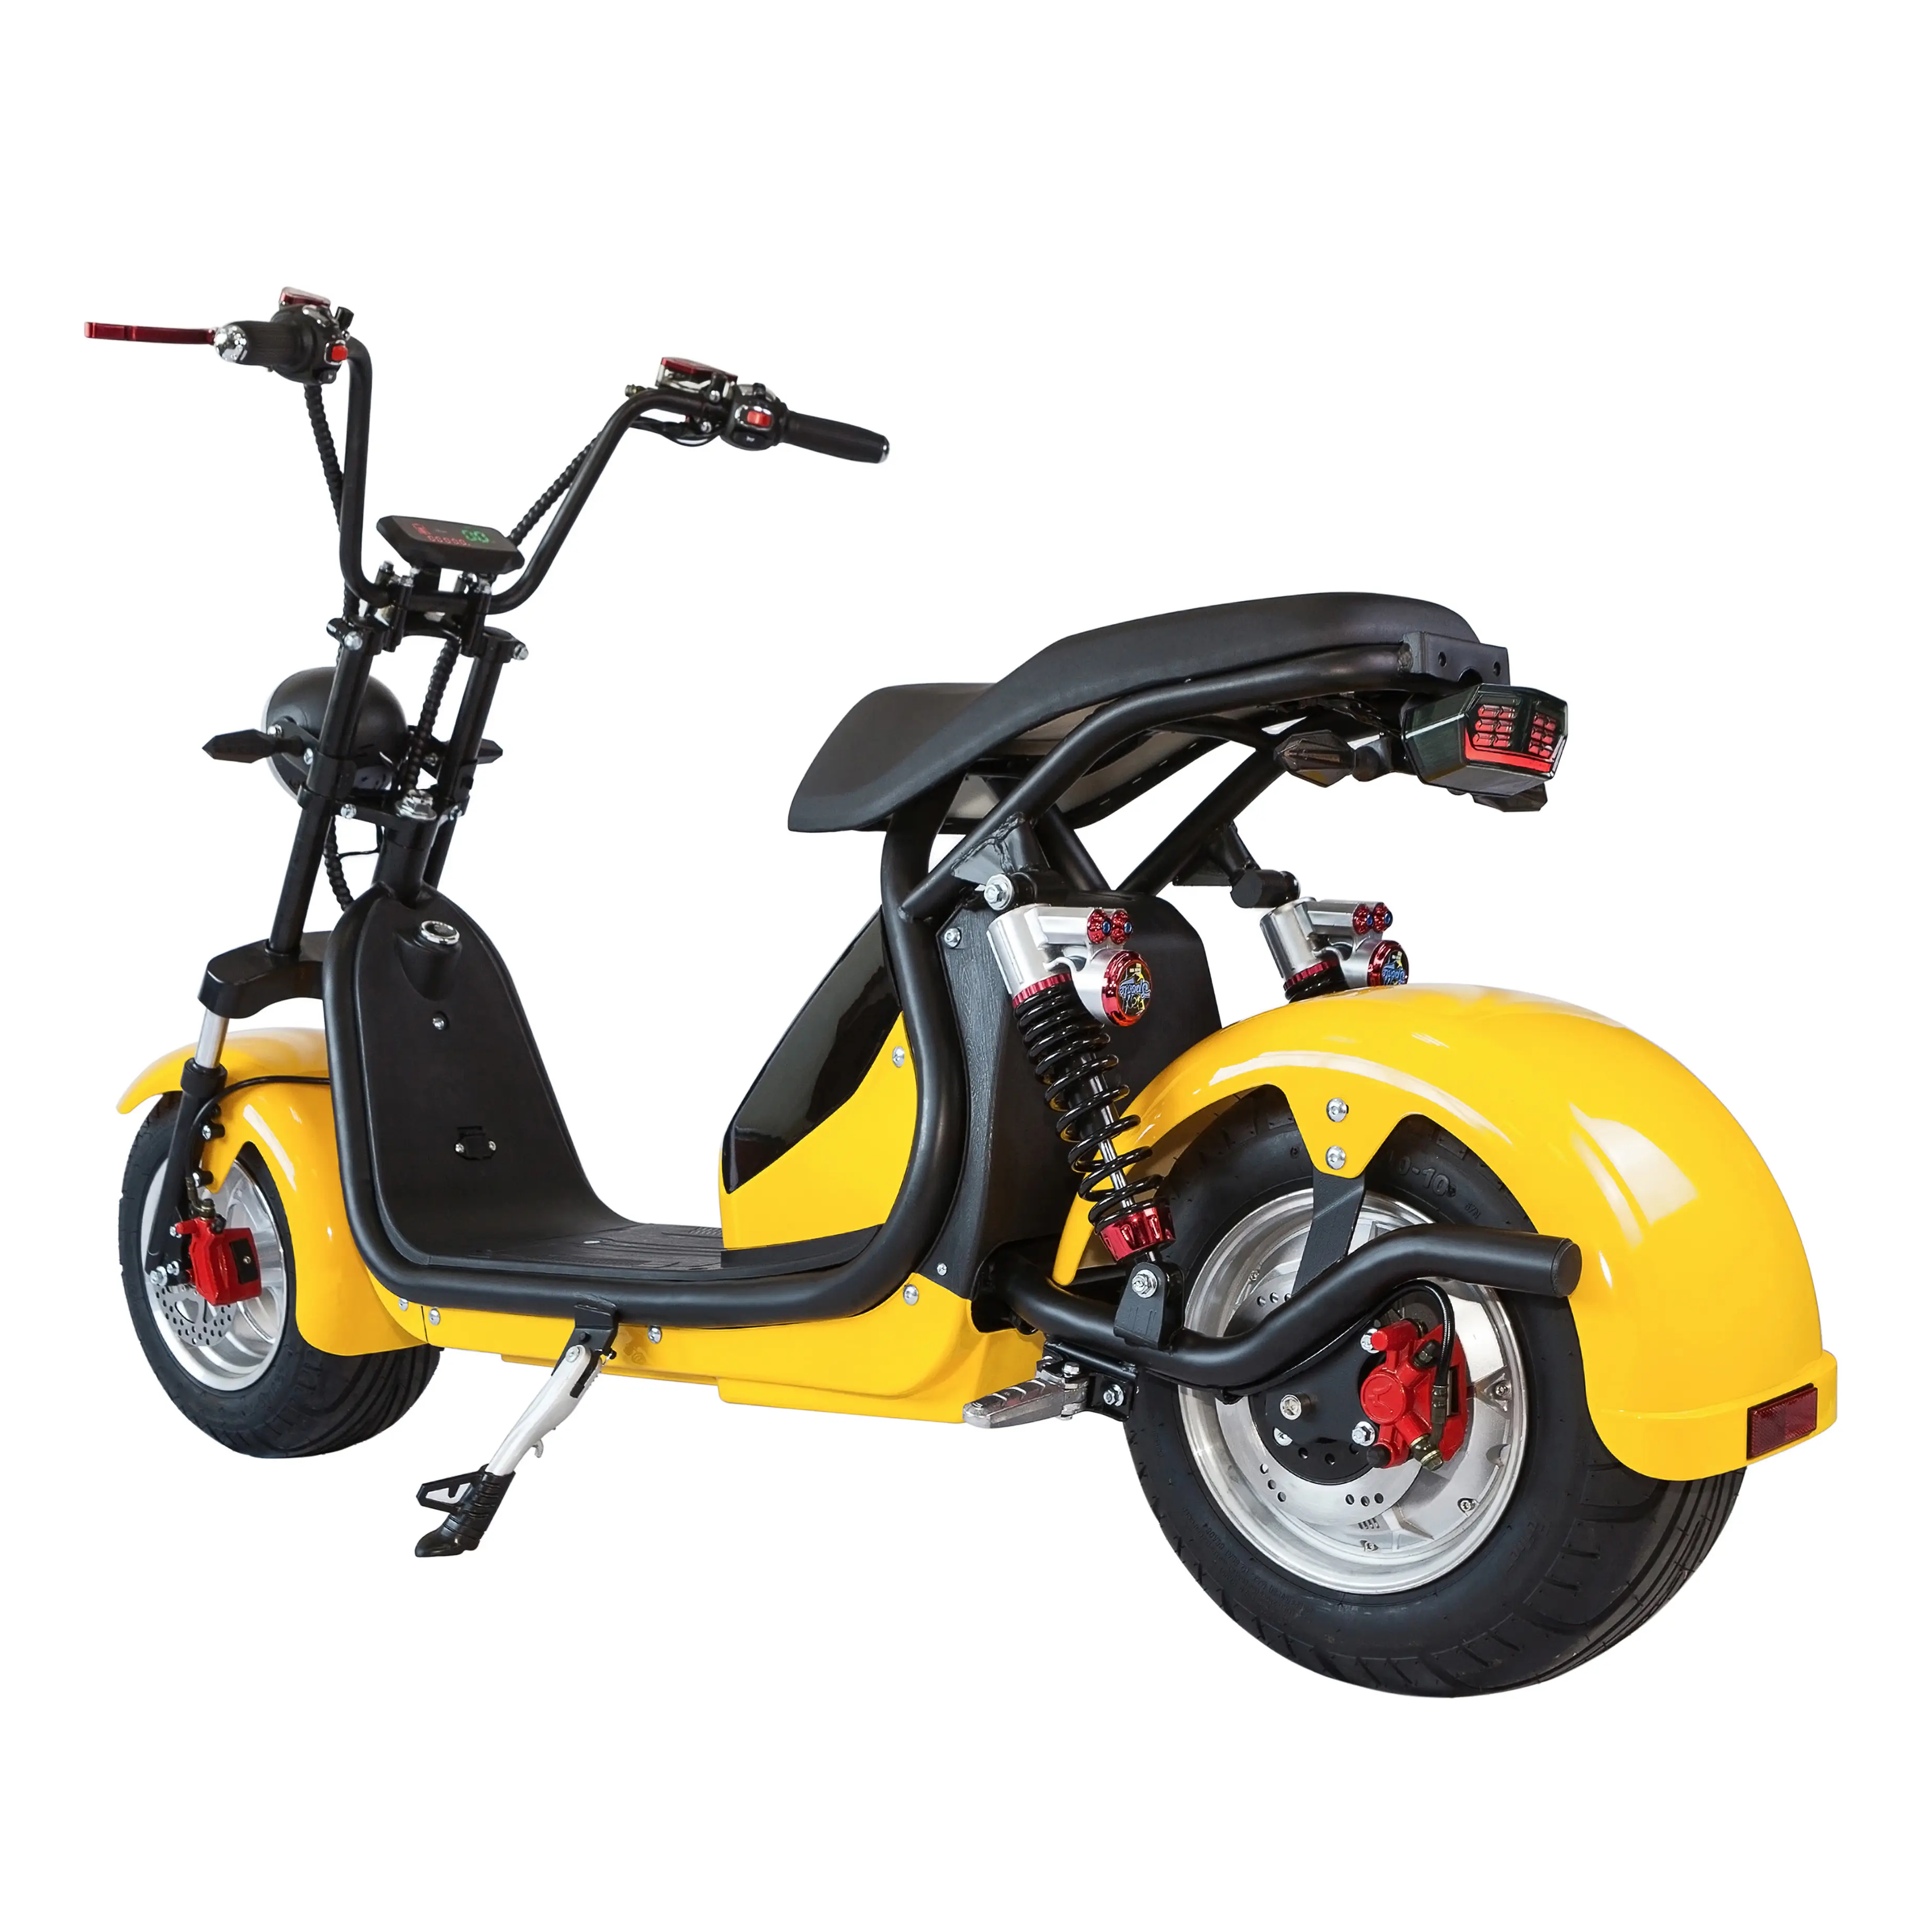 Eec/Coc Certificated Electric Tricycles 1500w Double Seat 2 Wheel Electric Scooters Adult